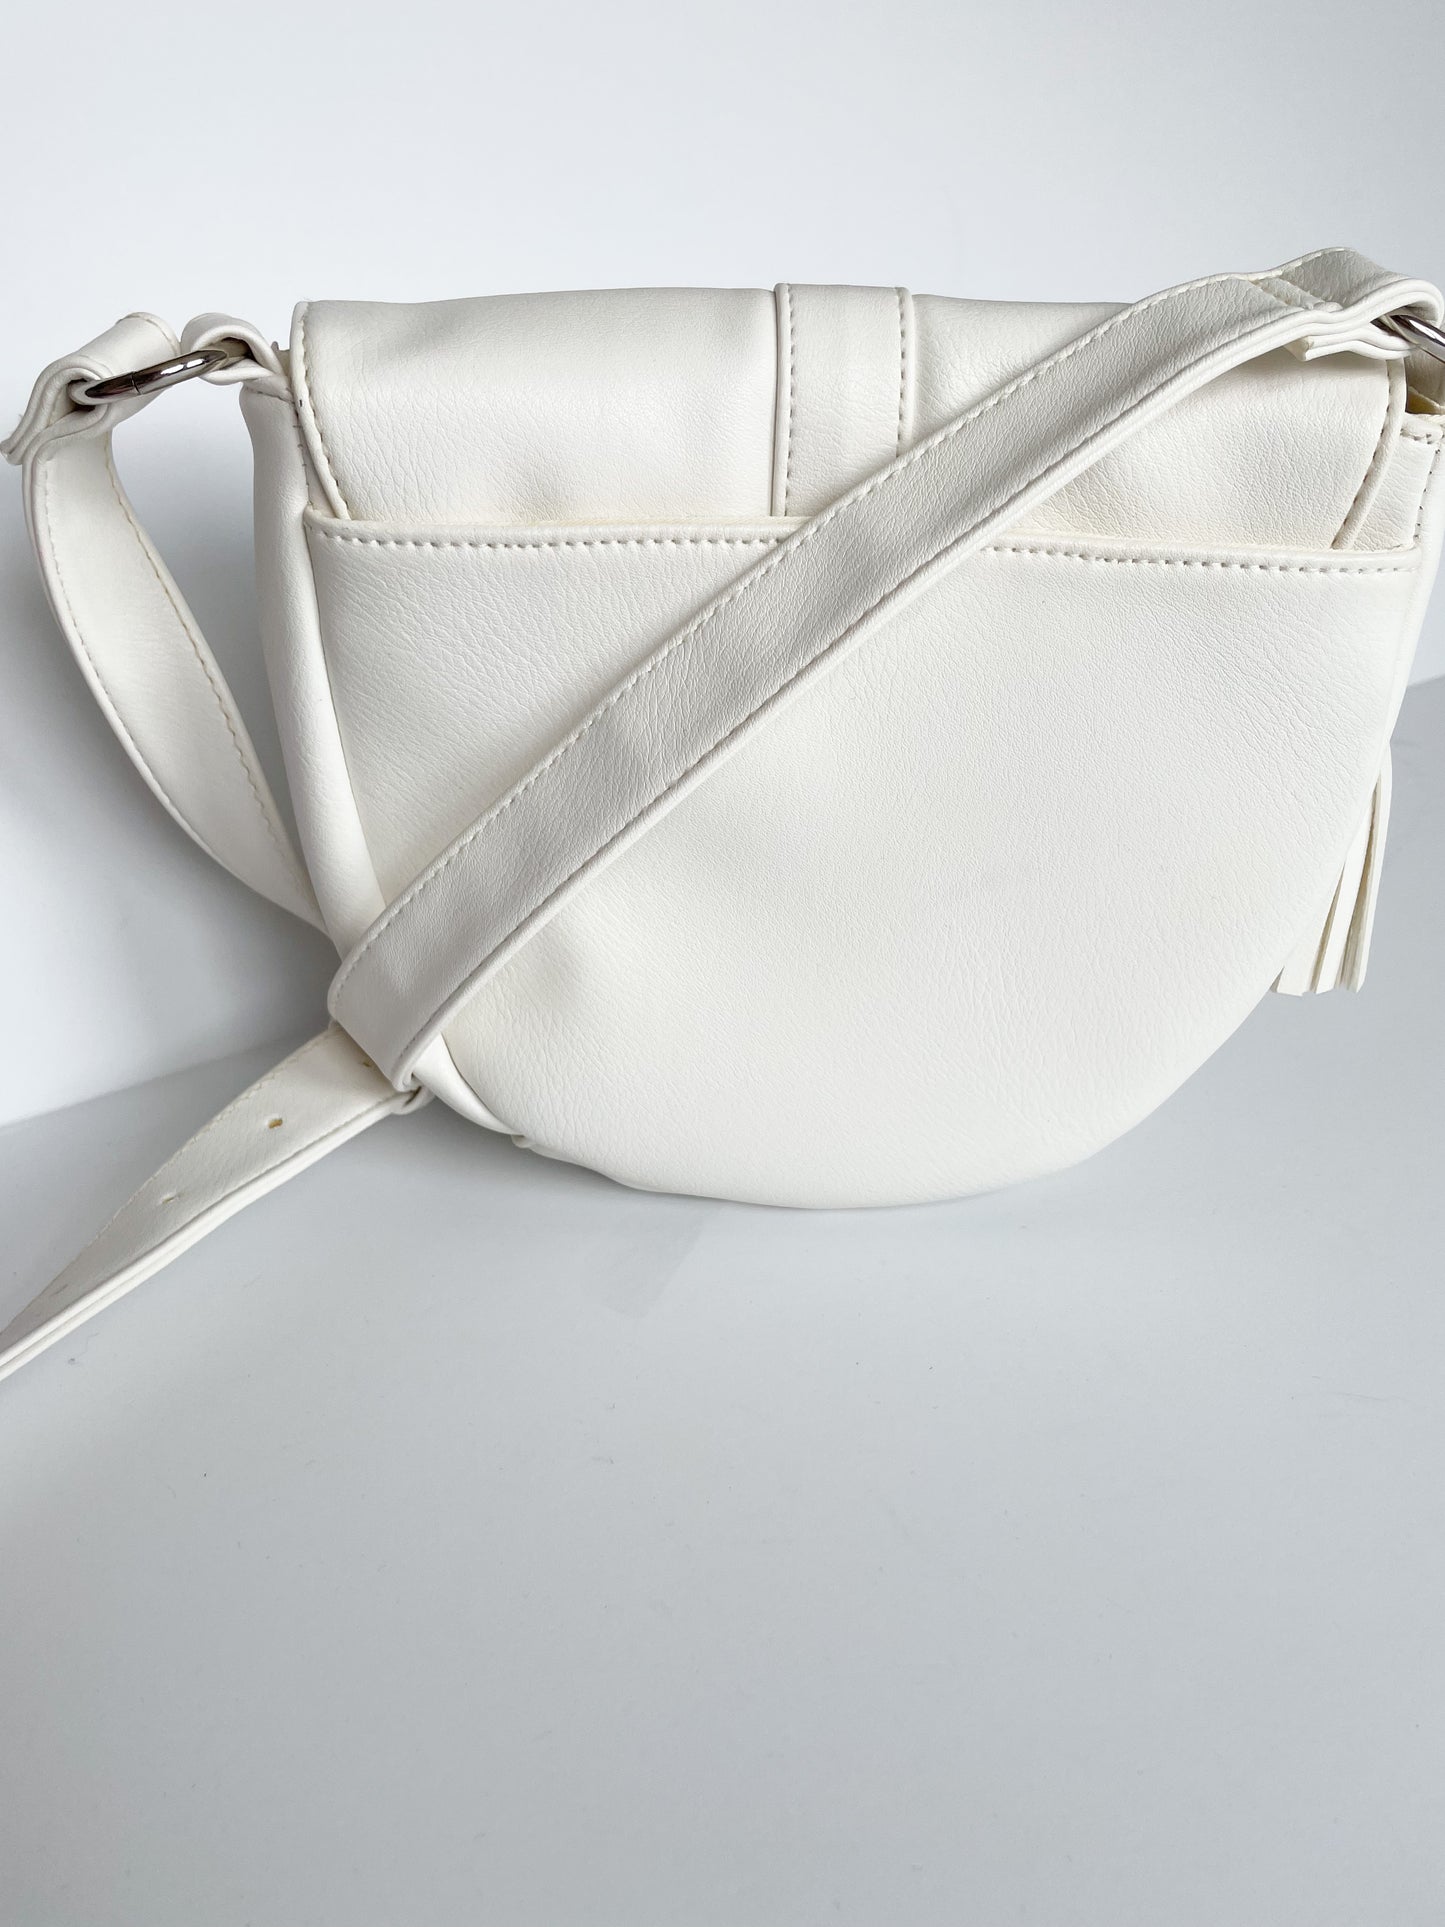 Signature Selections White Crossbody Saddle Bag with Tassels